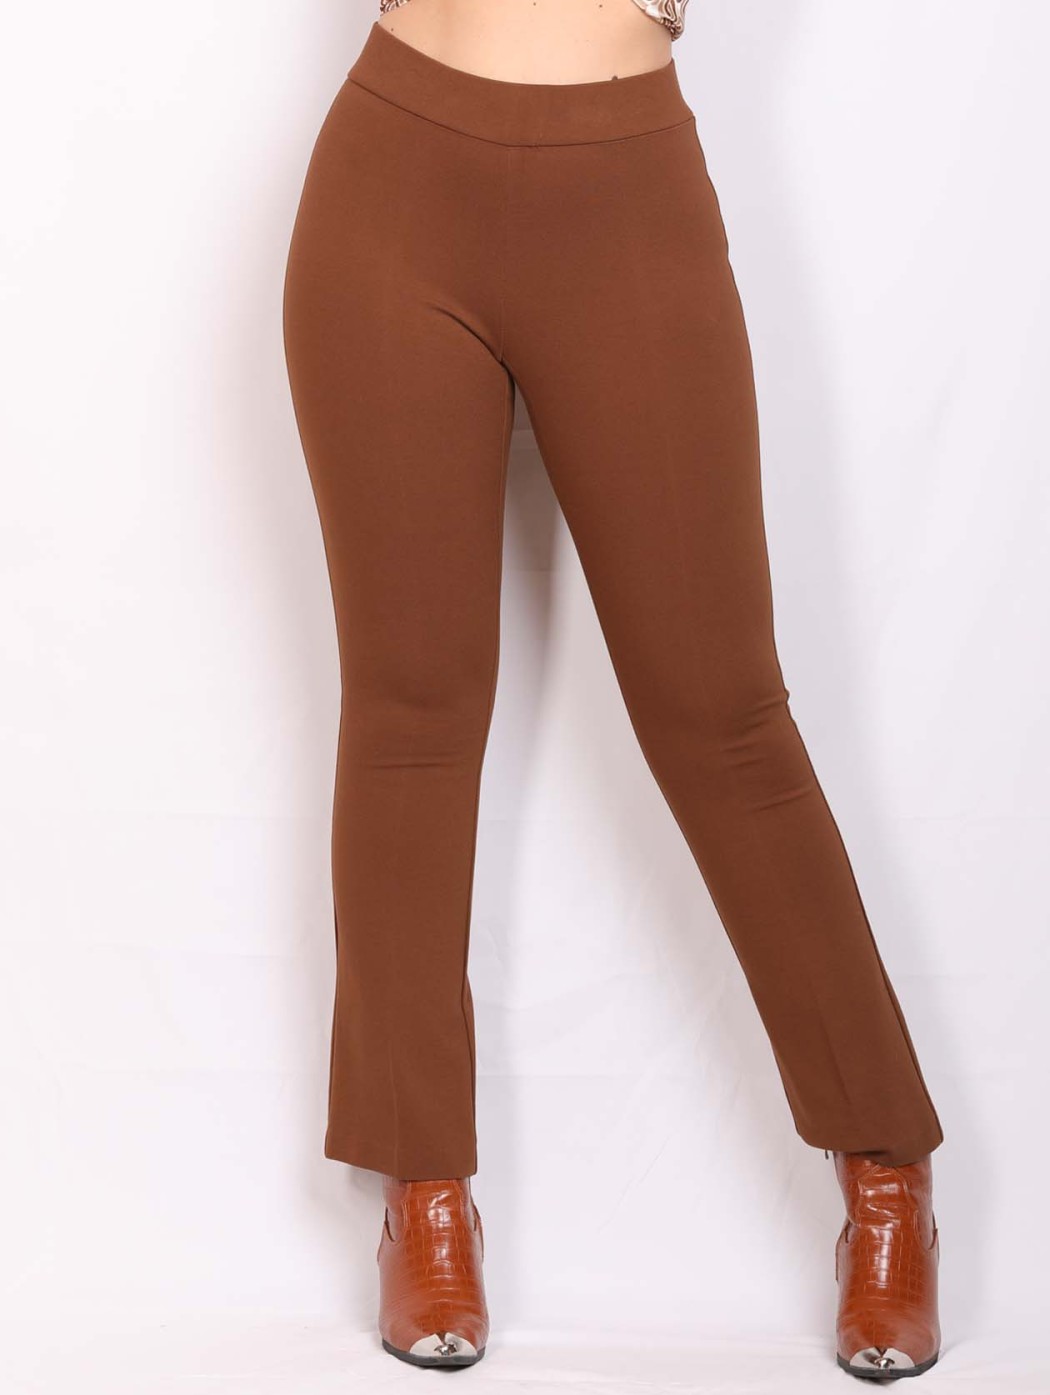 Thick jersey push up brown...